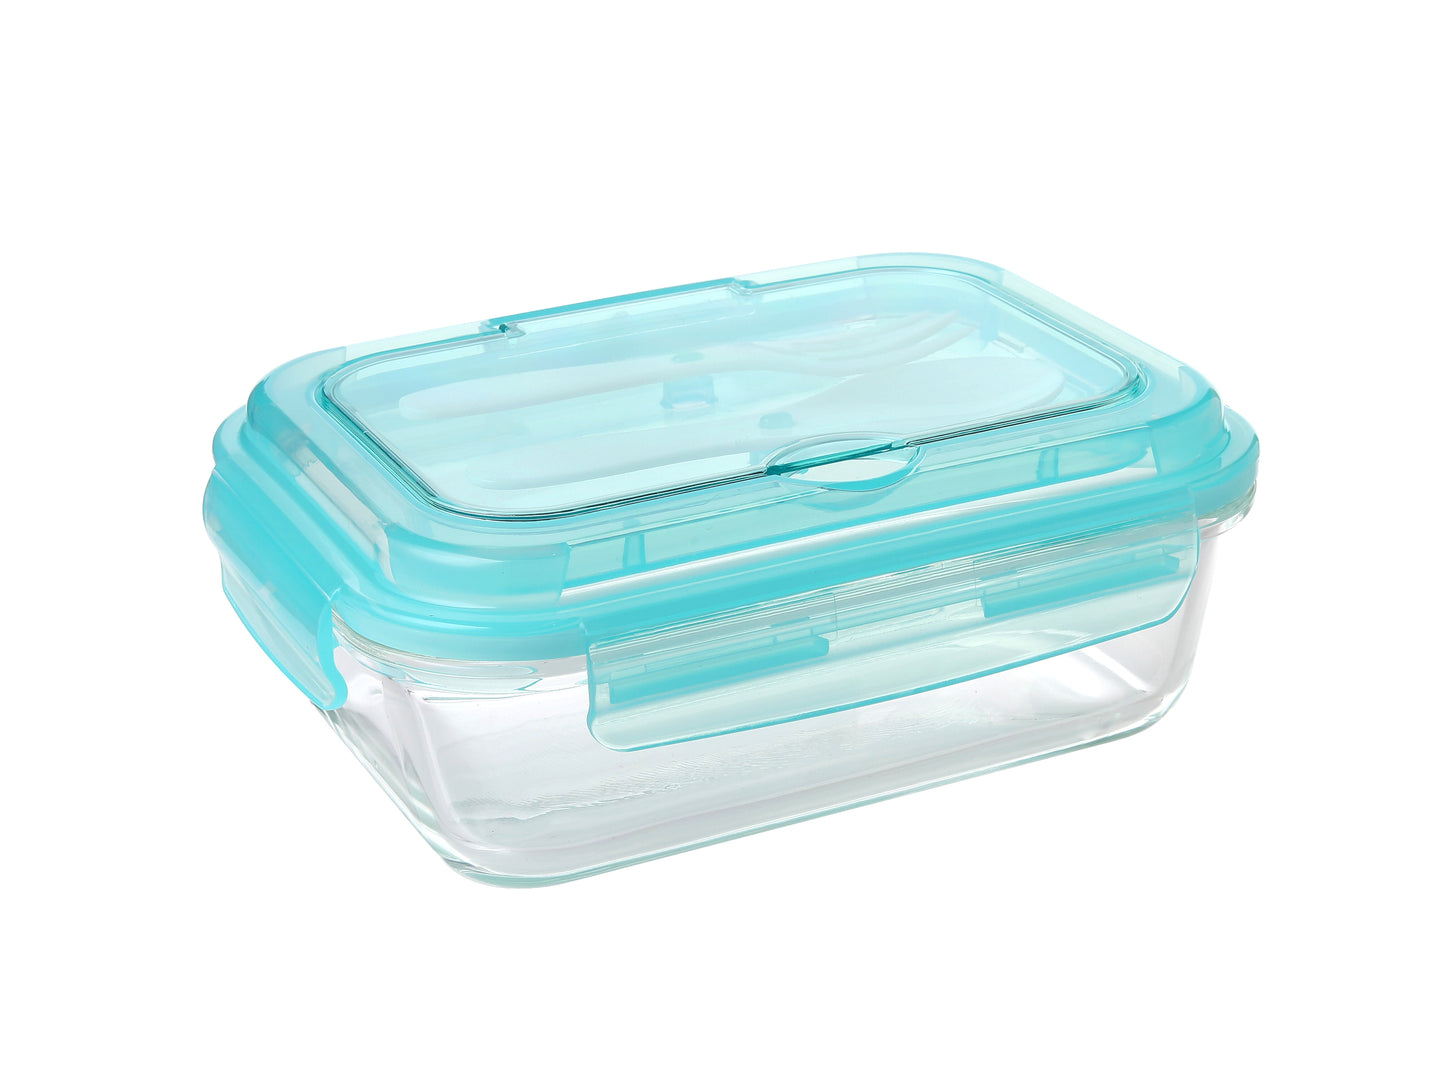 Delight King 33.8oz Rectangular Glass Storage Containers - Leak-Proof, Heat-Resistant, BPA-Free Kitchen Storage Containers - Microwave-Safe Meal Prep Containers with Built-In Tableware